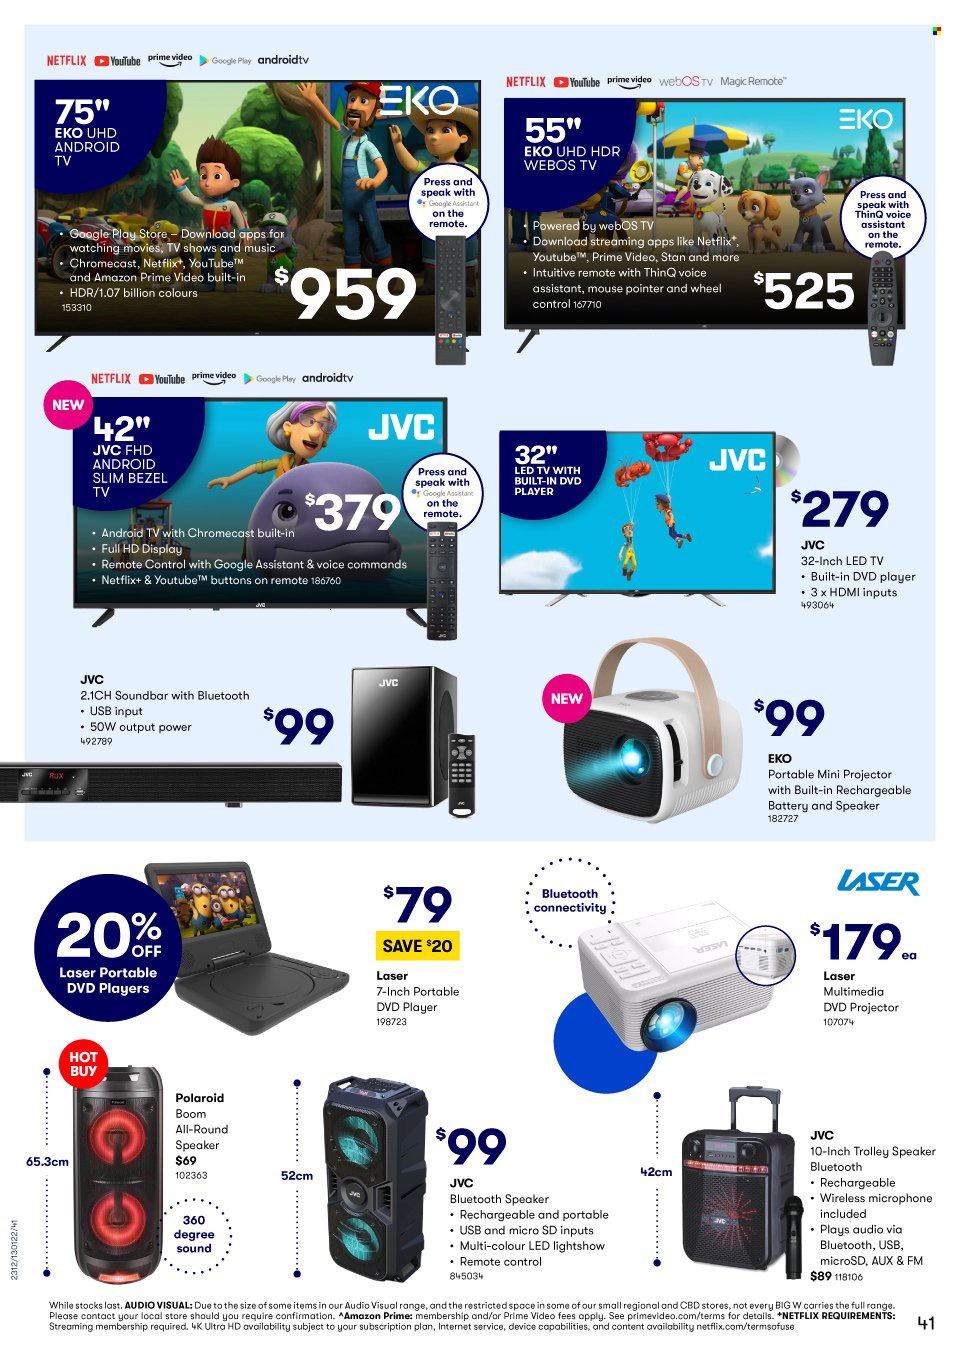 thumbnail - BIG W Catalogue - Sales products - Voom, mouse, Polaroid, JVC, Android TV, LED TV, UHD TV, ultra hd, TV, dvd player, projector, speaker, bluetooth speaker, sound bar, trolley speaker, microphone, remote control, Google Chromecast. Page 41.